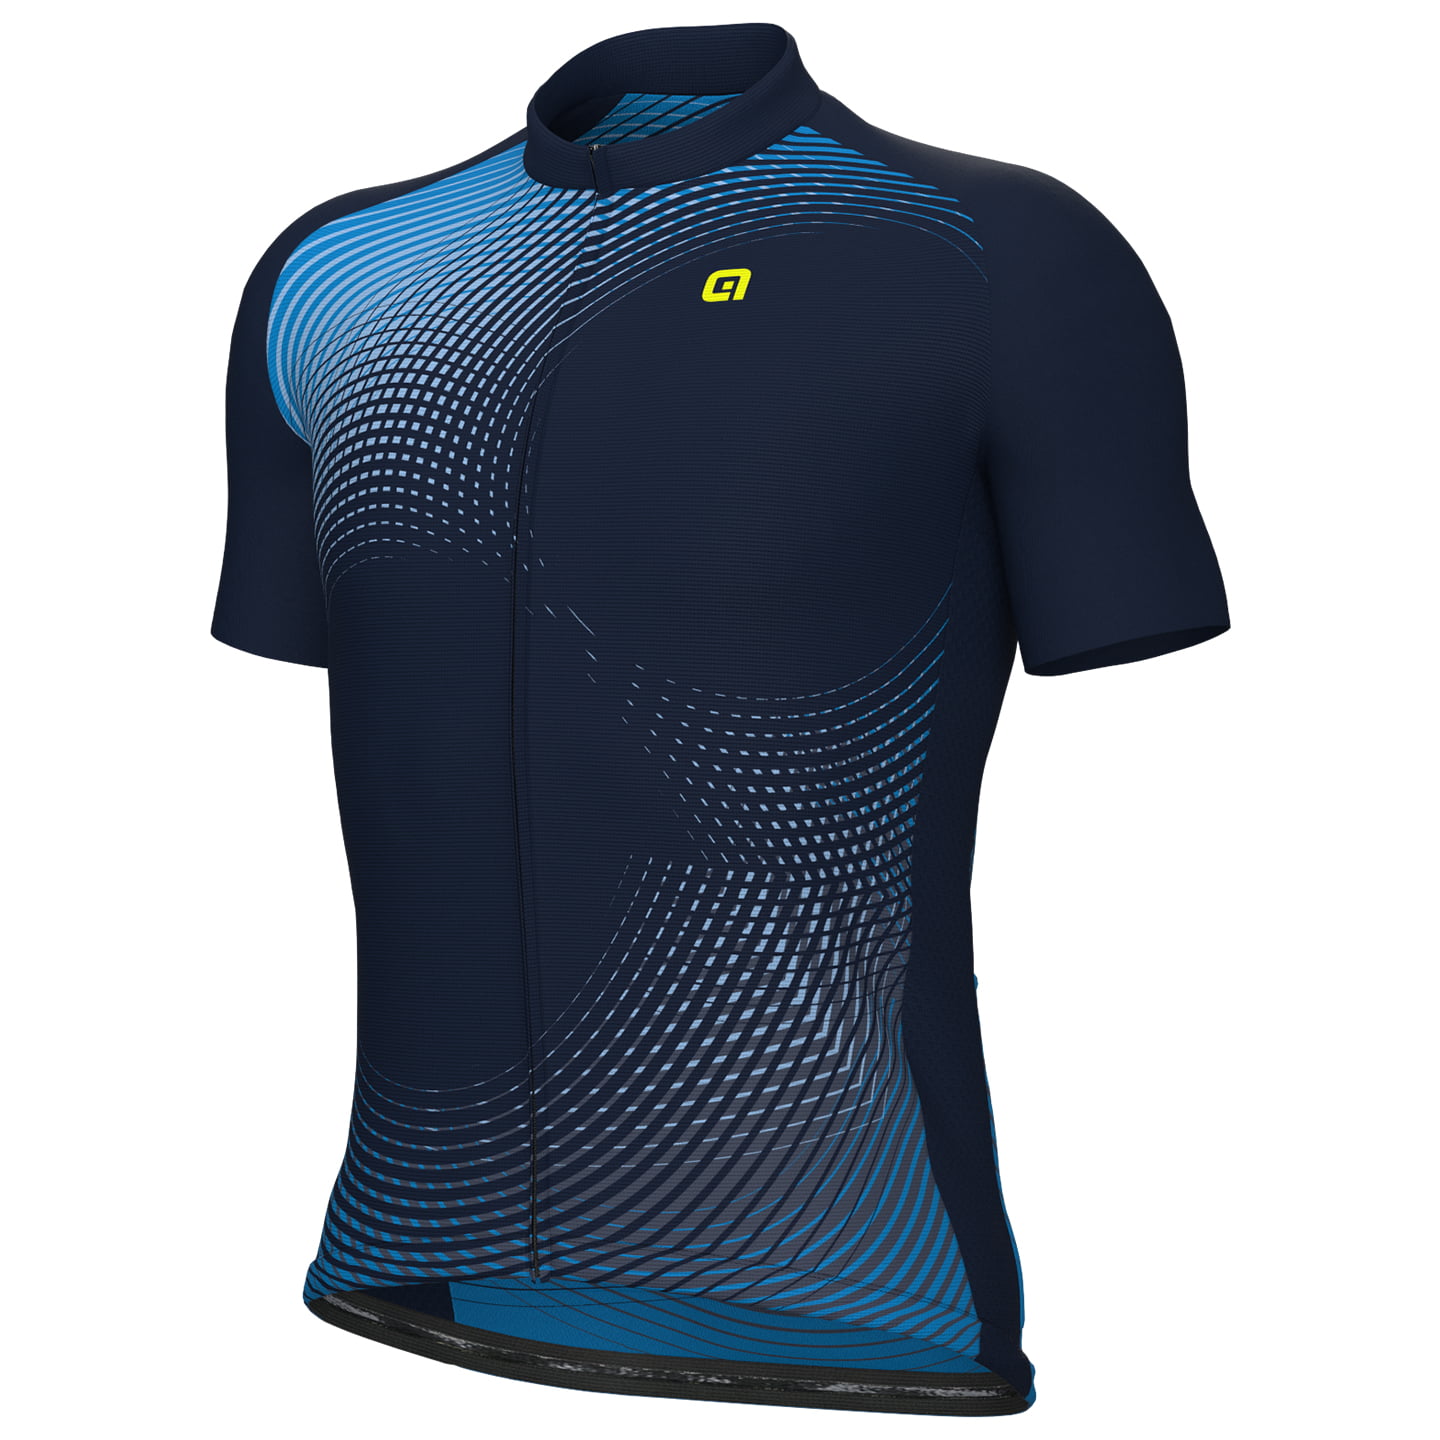 ALE Optical Short Sleeve Jersey, for men, size XL, Cycling jersey, Cycle clothing